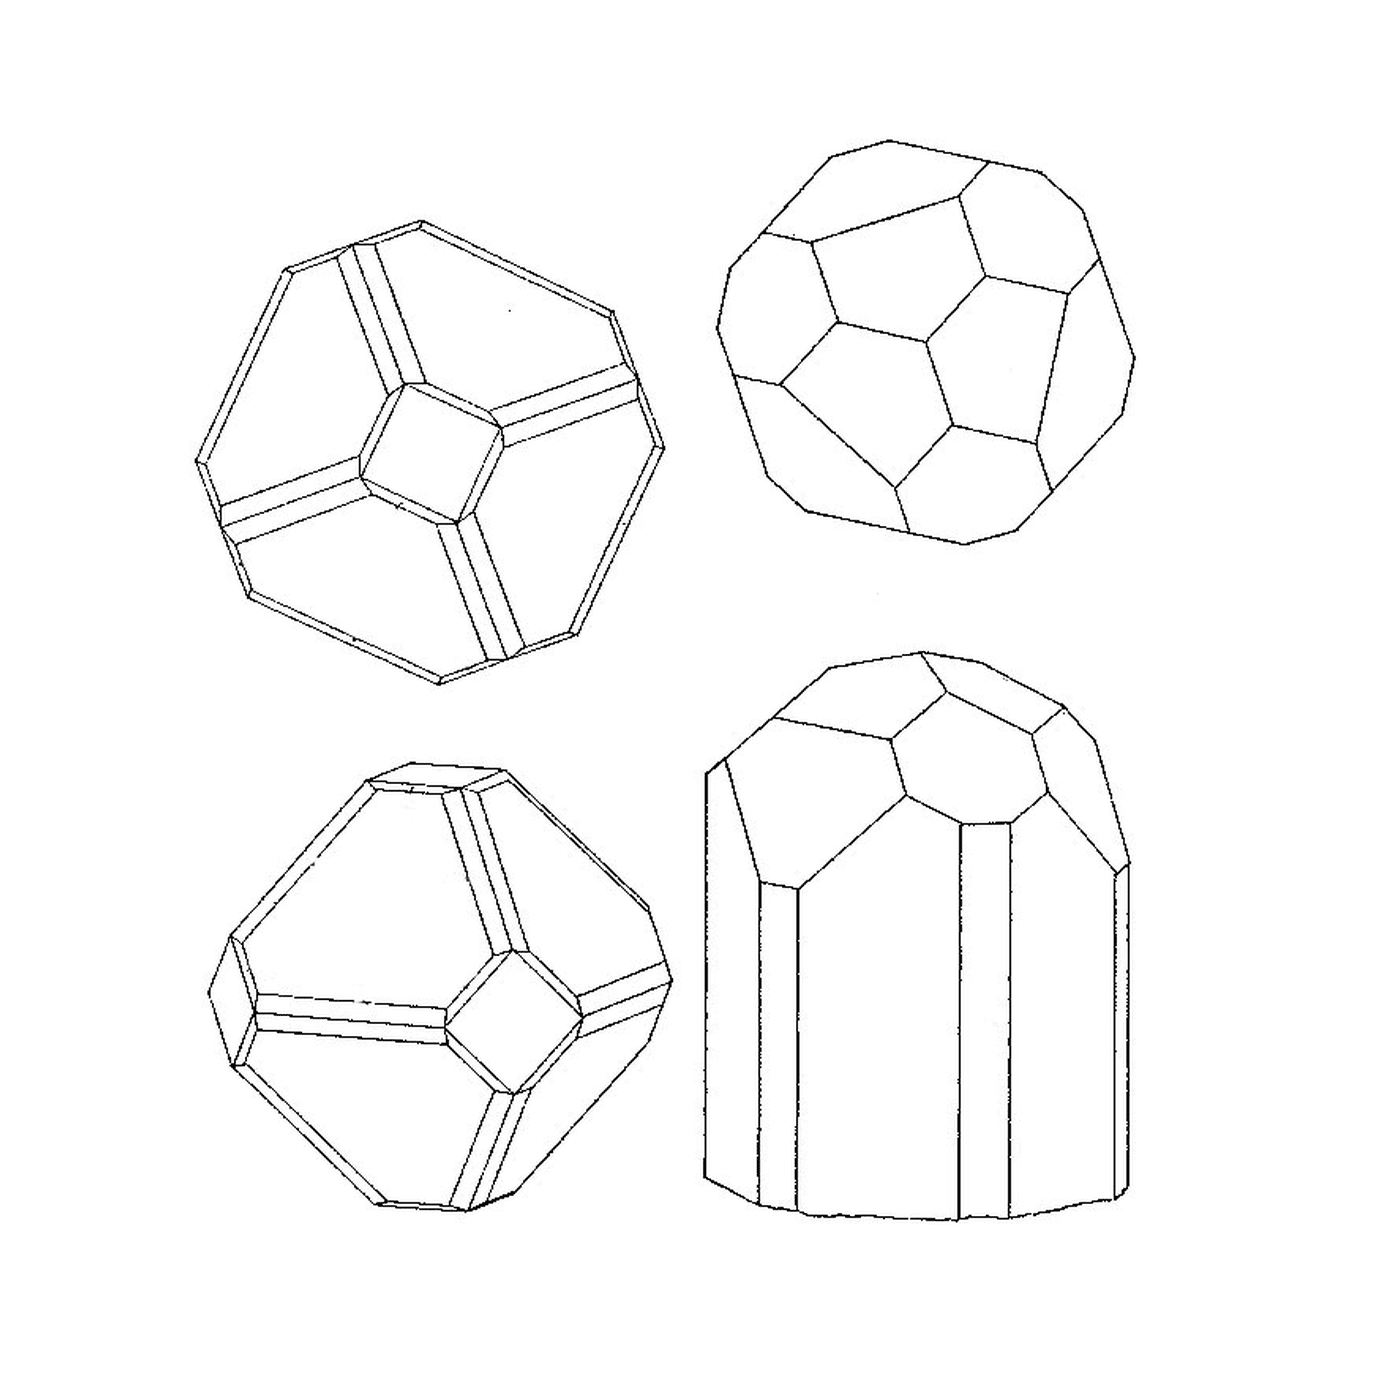  Four different geometric shapes 